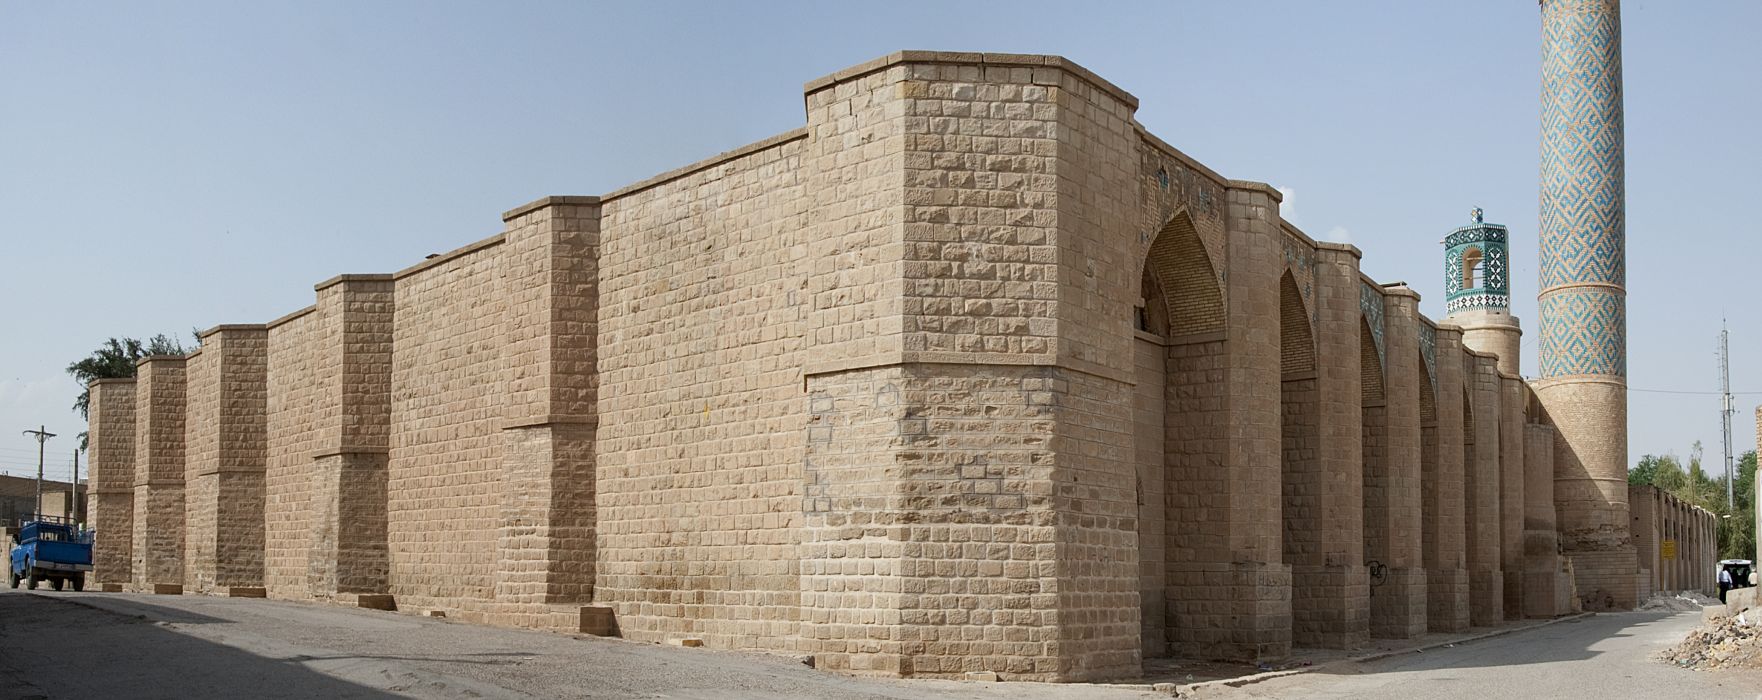 Exterior view of south corner. The buttressed qibla wall is visible at left.